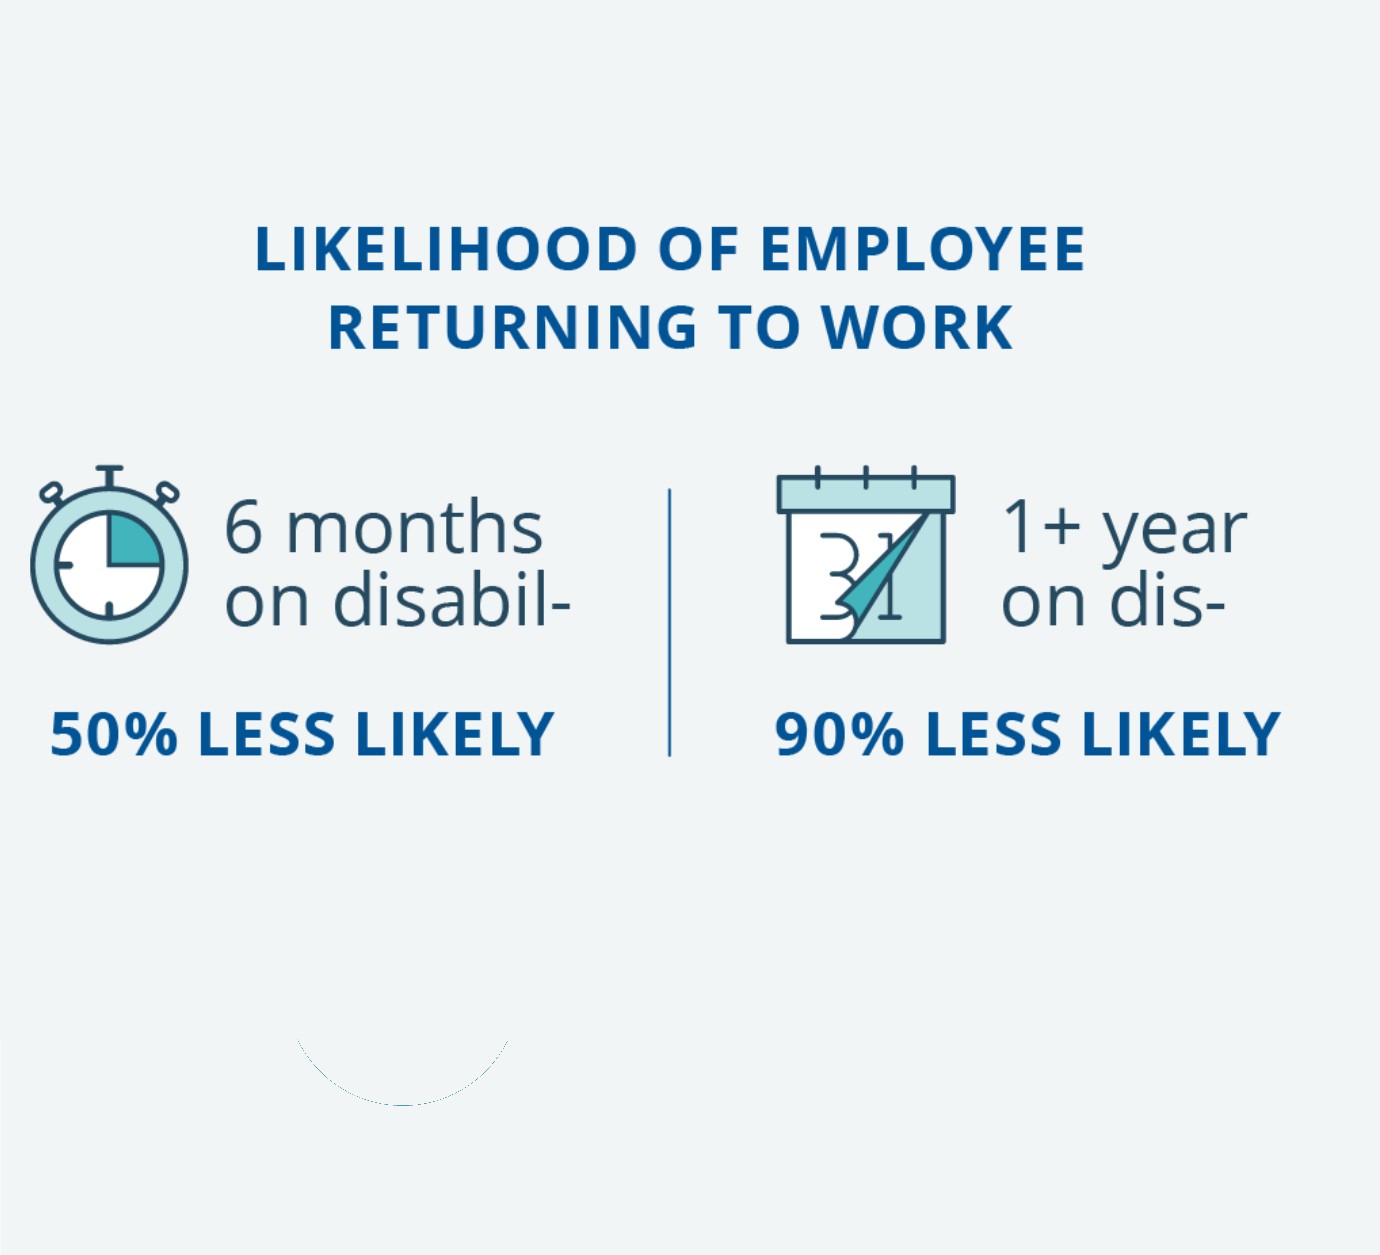 An effective return-to-work strategy and dedicated mental health support from disability providers can reduce the likelihood of a short-term disability claim advancing to a long-term disability claim.